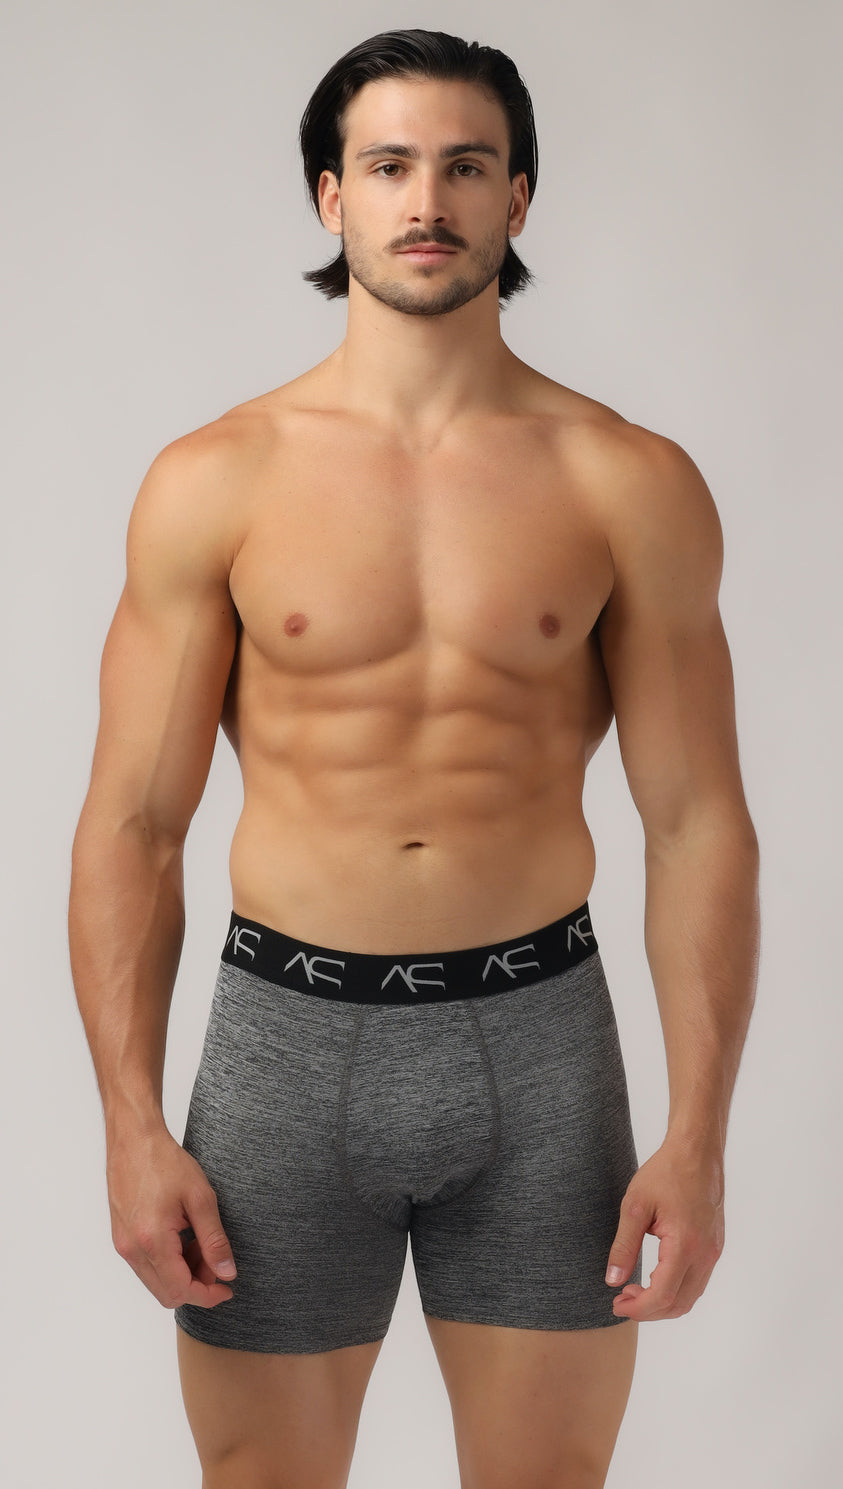 WORKOUT TRUNKS - DealByEthan.gay